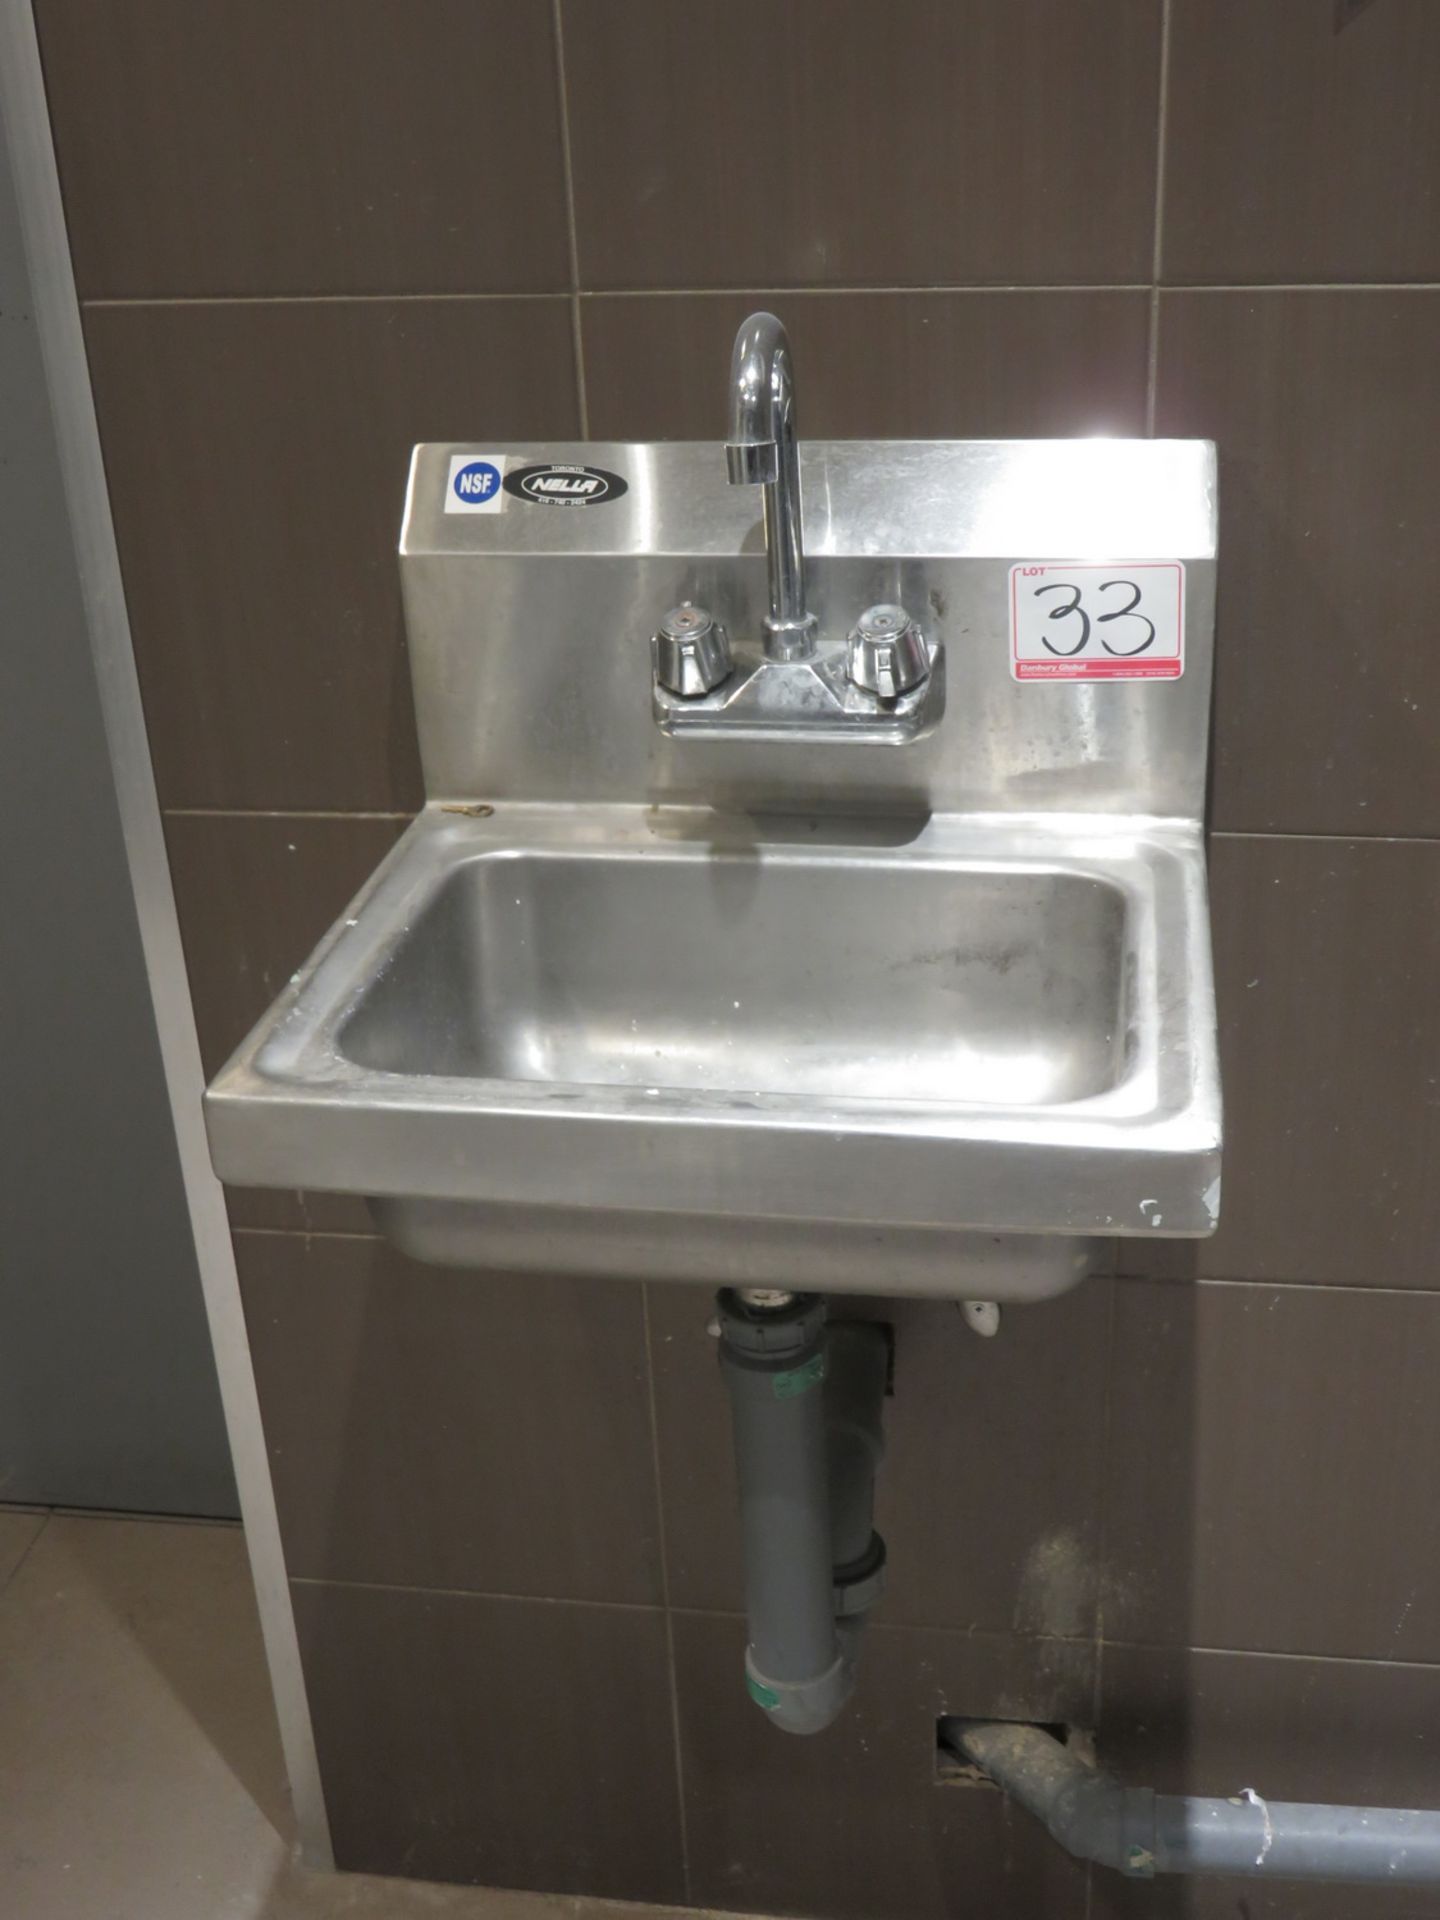 UNITS - NELLA STAINLESS STEEL 15" X 17" WALL MOUNT SINKS (3-UNITS) & (1) STAINLESS 12" X 18" SINK